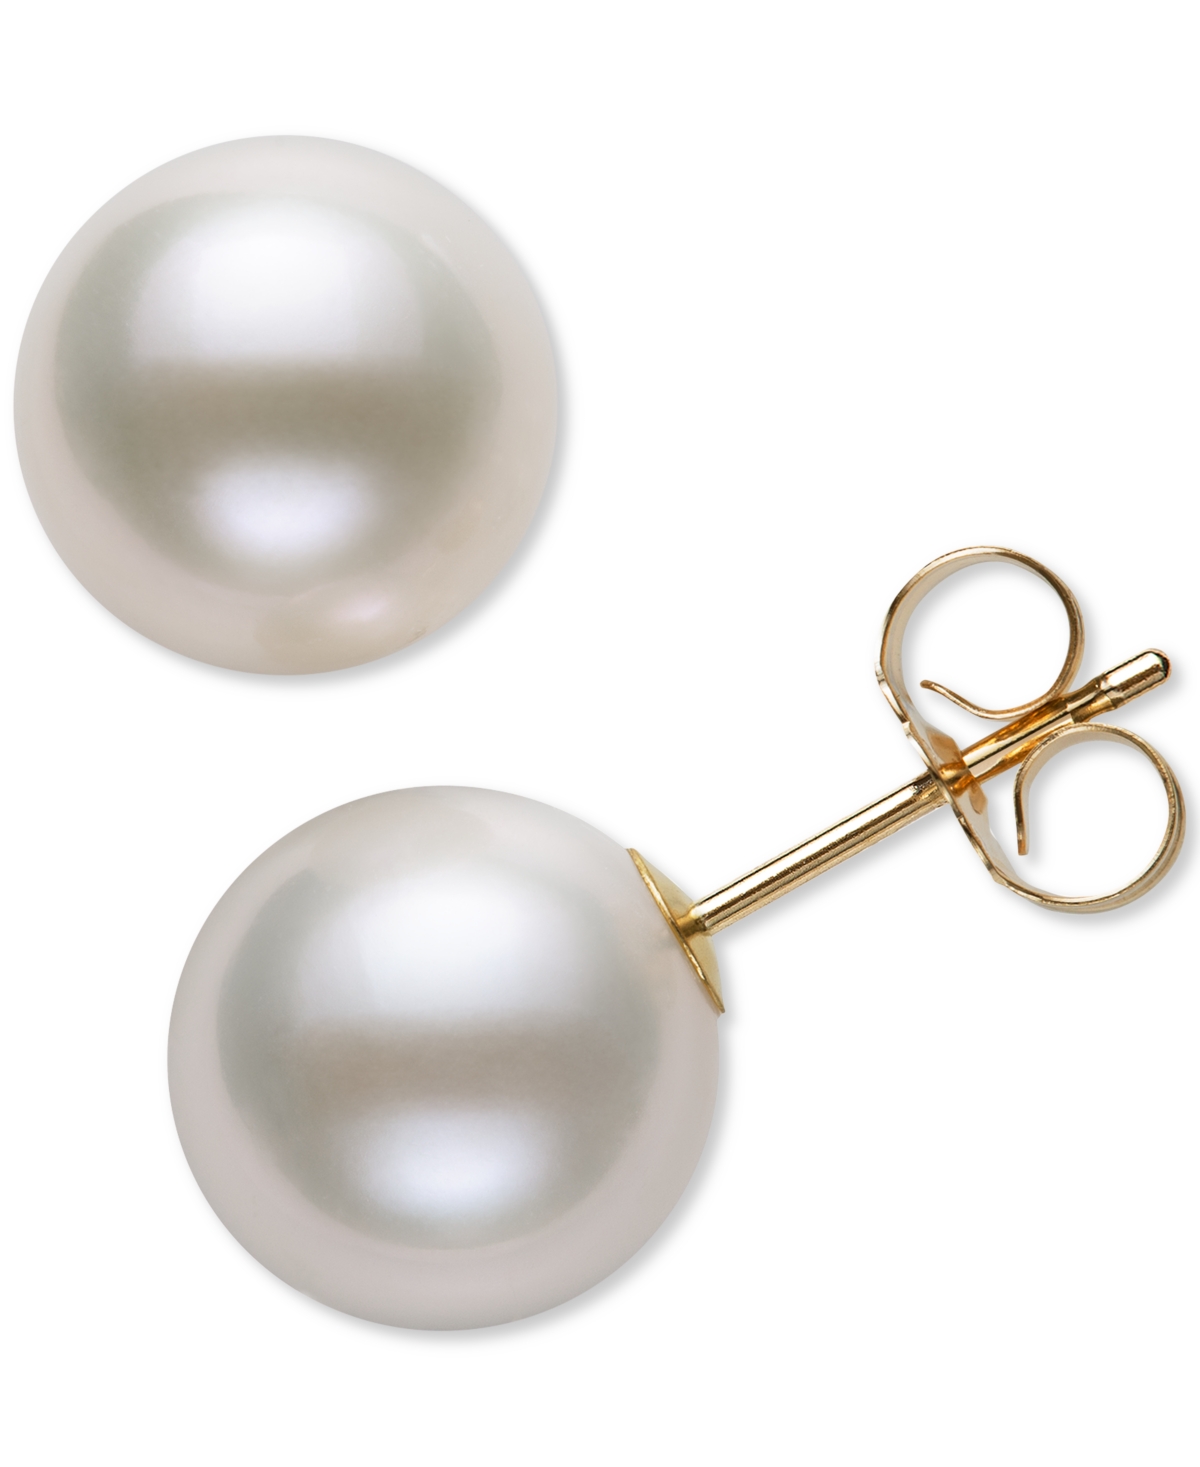 Cultured Freshwater Pearl Stud 14k Yellow Gold Earrings (8mm) - Gray